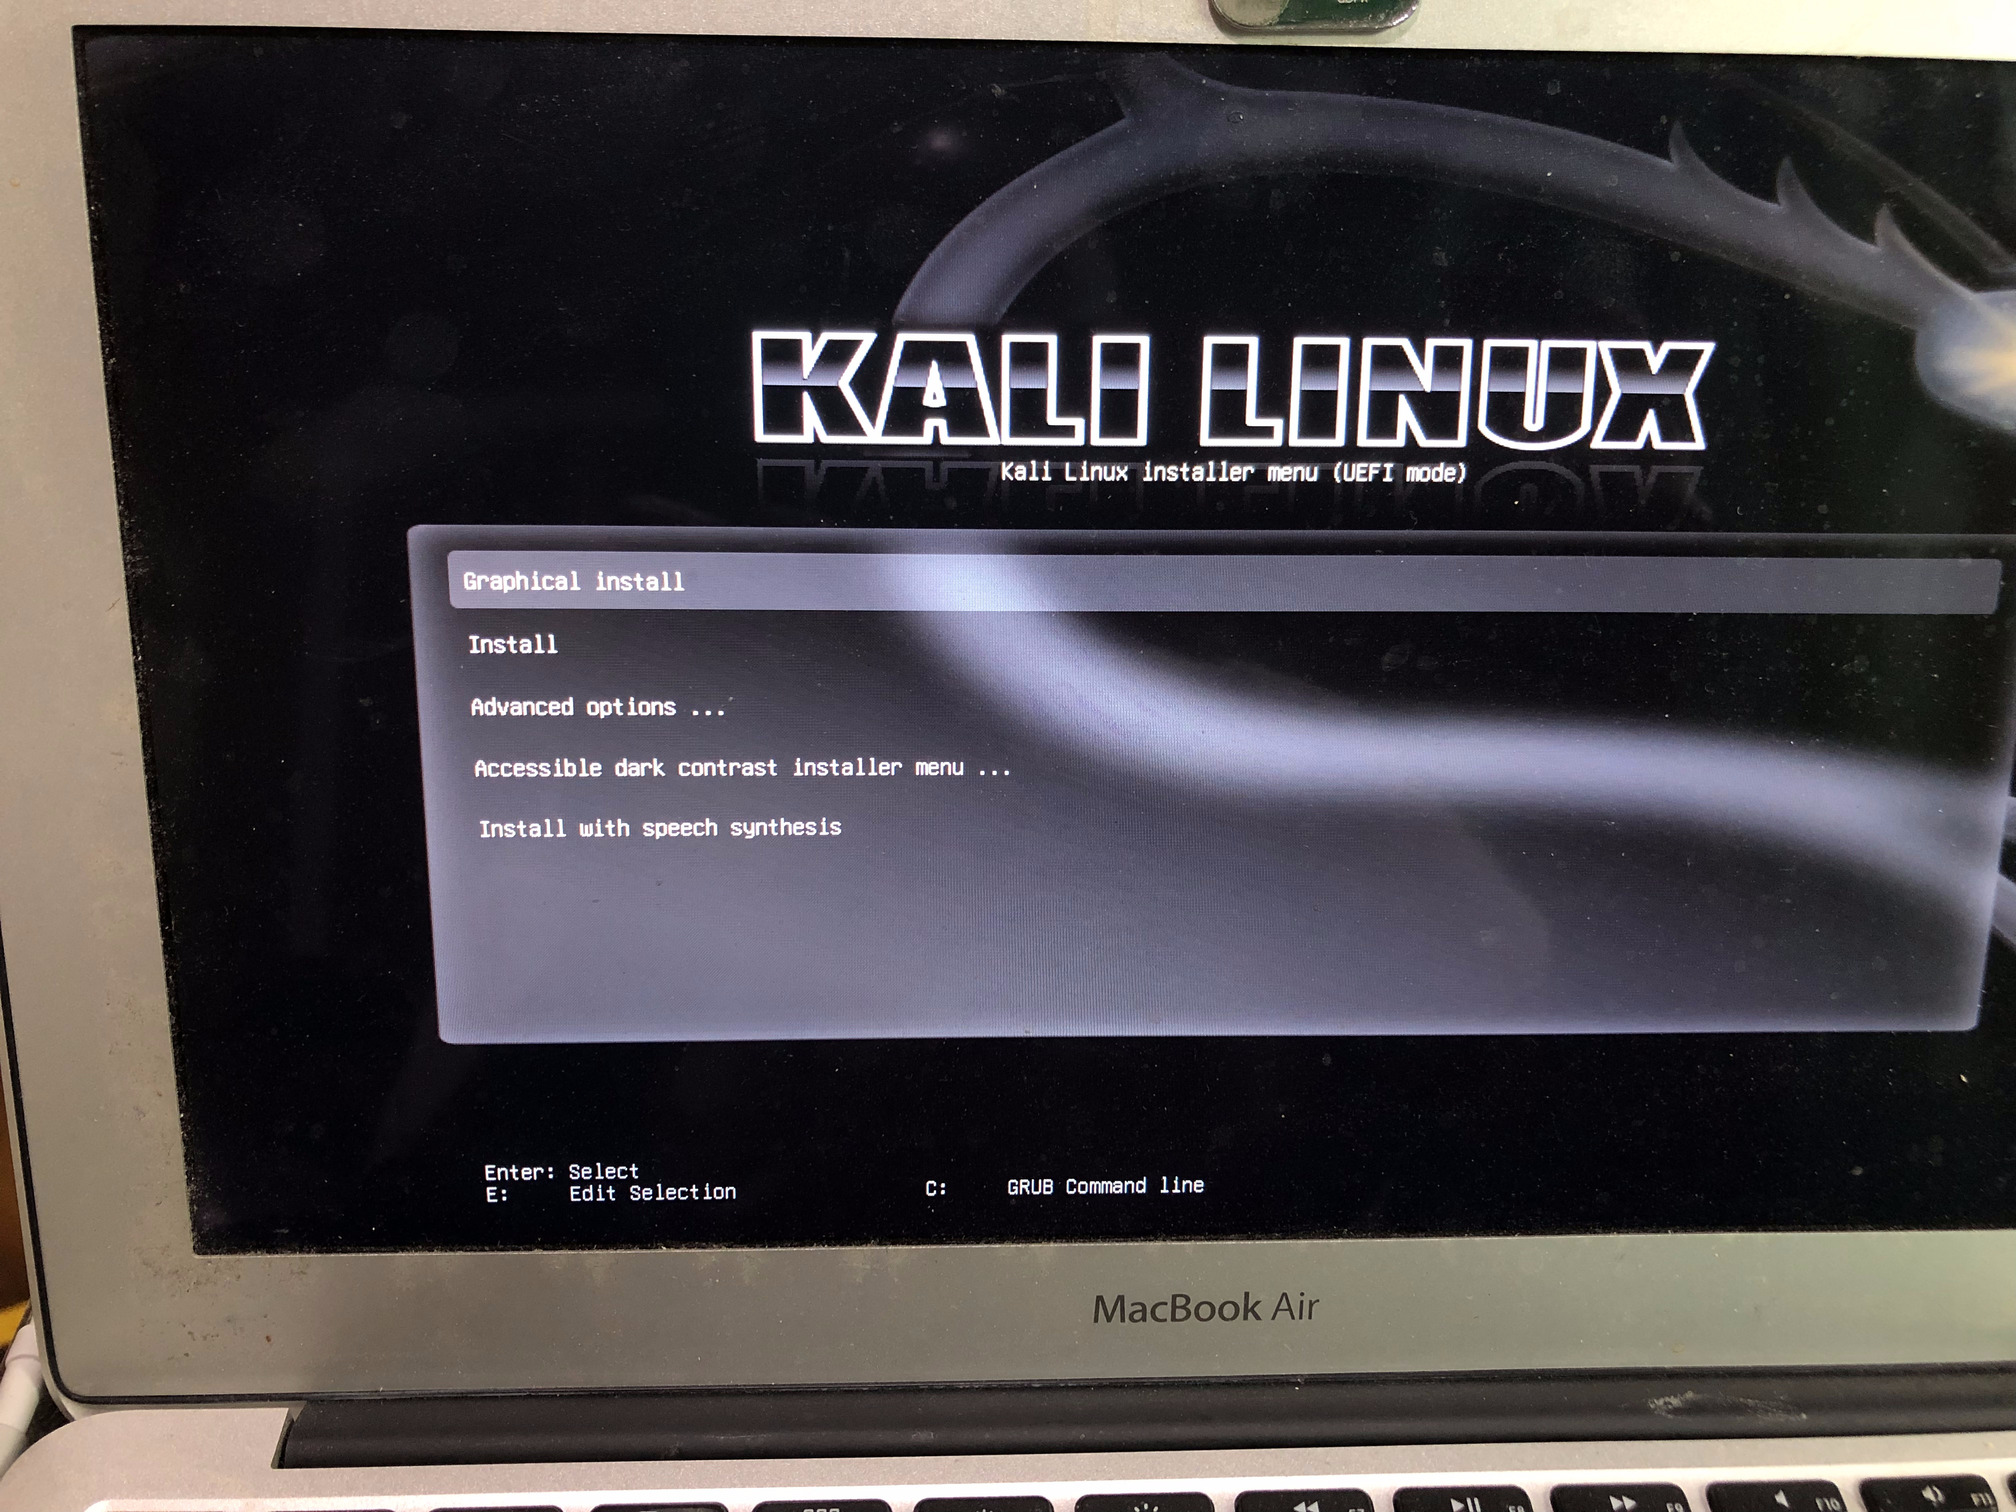 Figure 9. Kali Linux installer booting on the MacBook Air